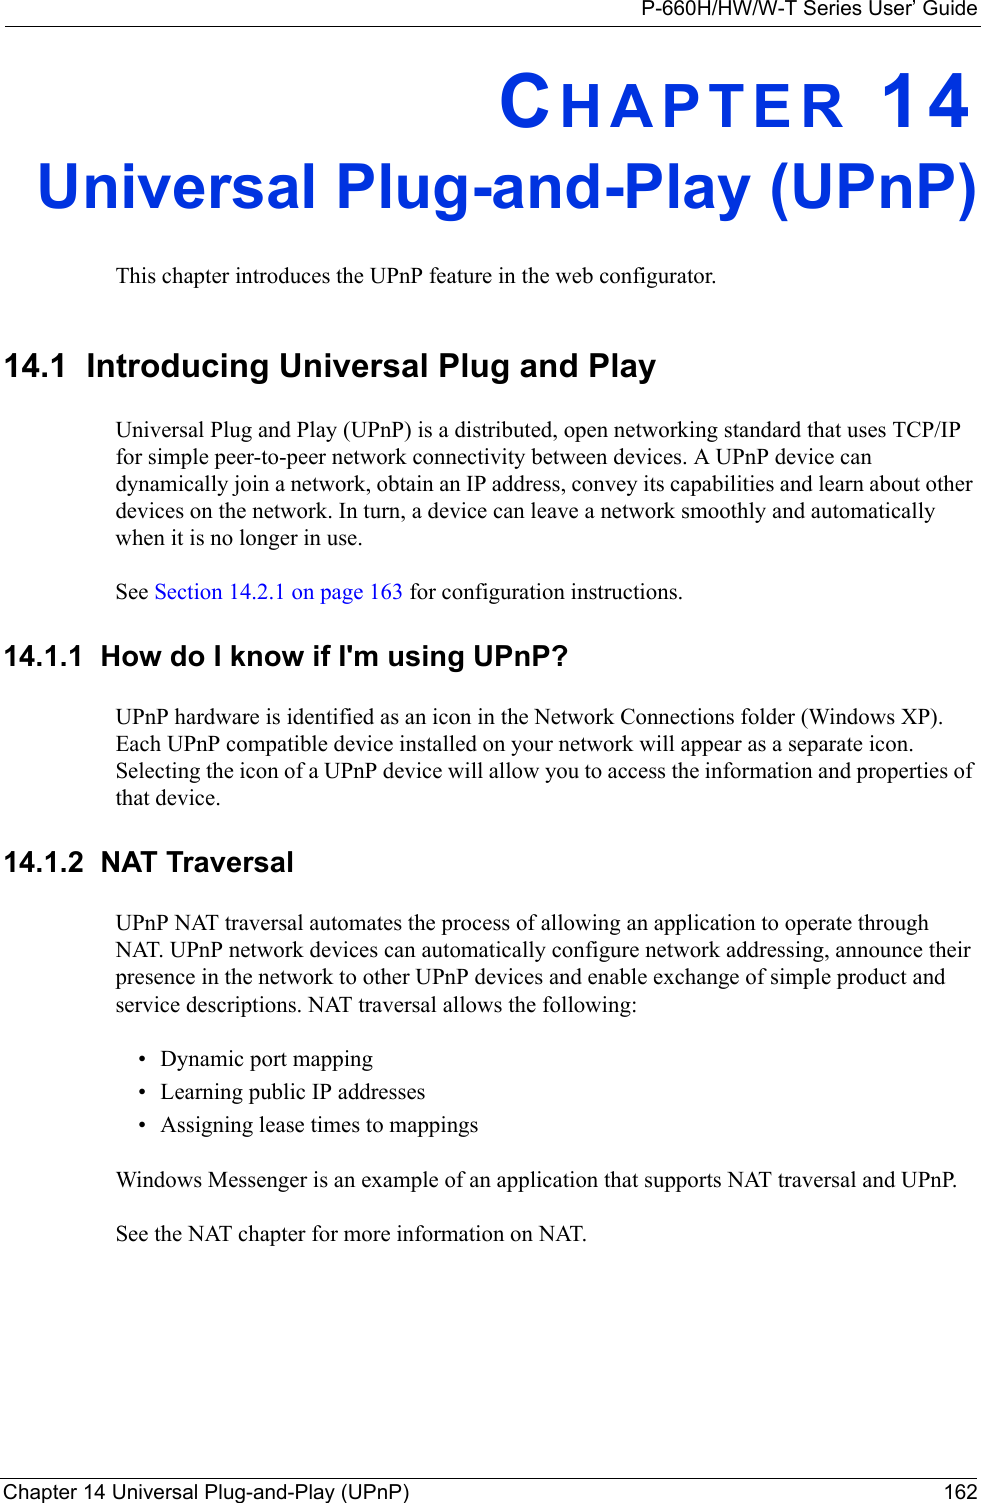 P-660H/HW/W-T Series User’ GuideChapter 14 Universal Plug-and-Play (UPnP) 162CHAPTER 14Universal Plug-and-Play (UPnP)This chapter introduces the UPnP feature in the web configurator.14.1  Introducing Universal Plug and Play Universal Plug and Play (UPnP) is a distributed, open networking standard that uses TCP/IP for simple peer-to-peer network connectivity between devices. A UPnP device can dynamically join a network, obtain an IP address, convey its capabilities and learn about other devices on the network. In turn, a device can leave a network smoothly and automatically when it is no longer in use.See Section 14.2.1 on page 163 for configuration instructions. 14.1.1  How do I know if I&apos;m using UPnP? UPnP hardware is identified as an icon in the Network Connections folder (Windows XP). Each UPnP compatible device installed on your network will appear as a separate icon. Selecting the icon of a UPnP device will allow you to access the information and properties of that device. 14.1.2  NAT TraversalUPnP NAT traversal automates the process of allowing an application to operate through NAT. UPnP network devices can automatically configure network addressing, announce their presence in the network to other UPnP devices and enable exchange of simple product and service descriptions. NAT traversal allows the following:• Dynamic port mapping• Learning public IP addresses• Assigning lease times to mappingsWindows Messenger is an example of an application that supports NAT traversal and UPnP. See the NAT chapter for more information on NAT.